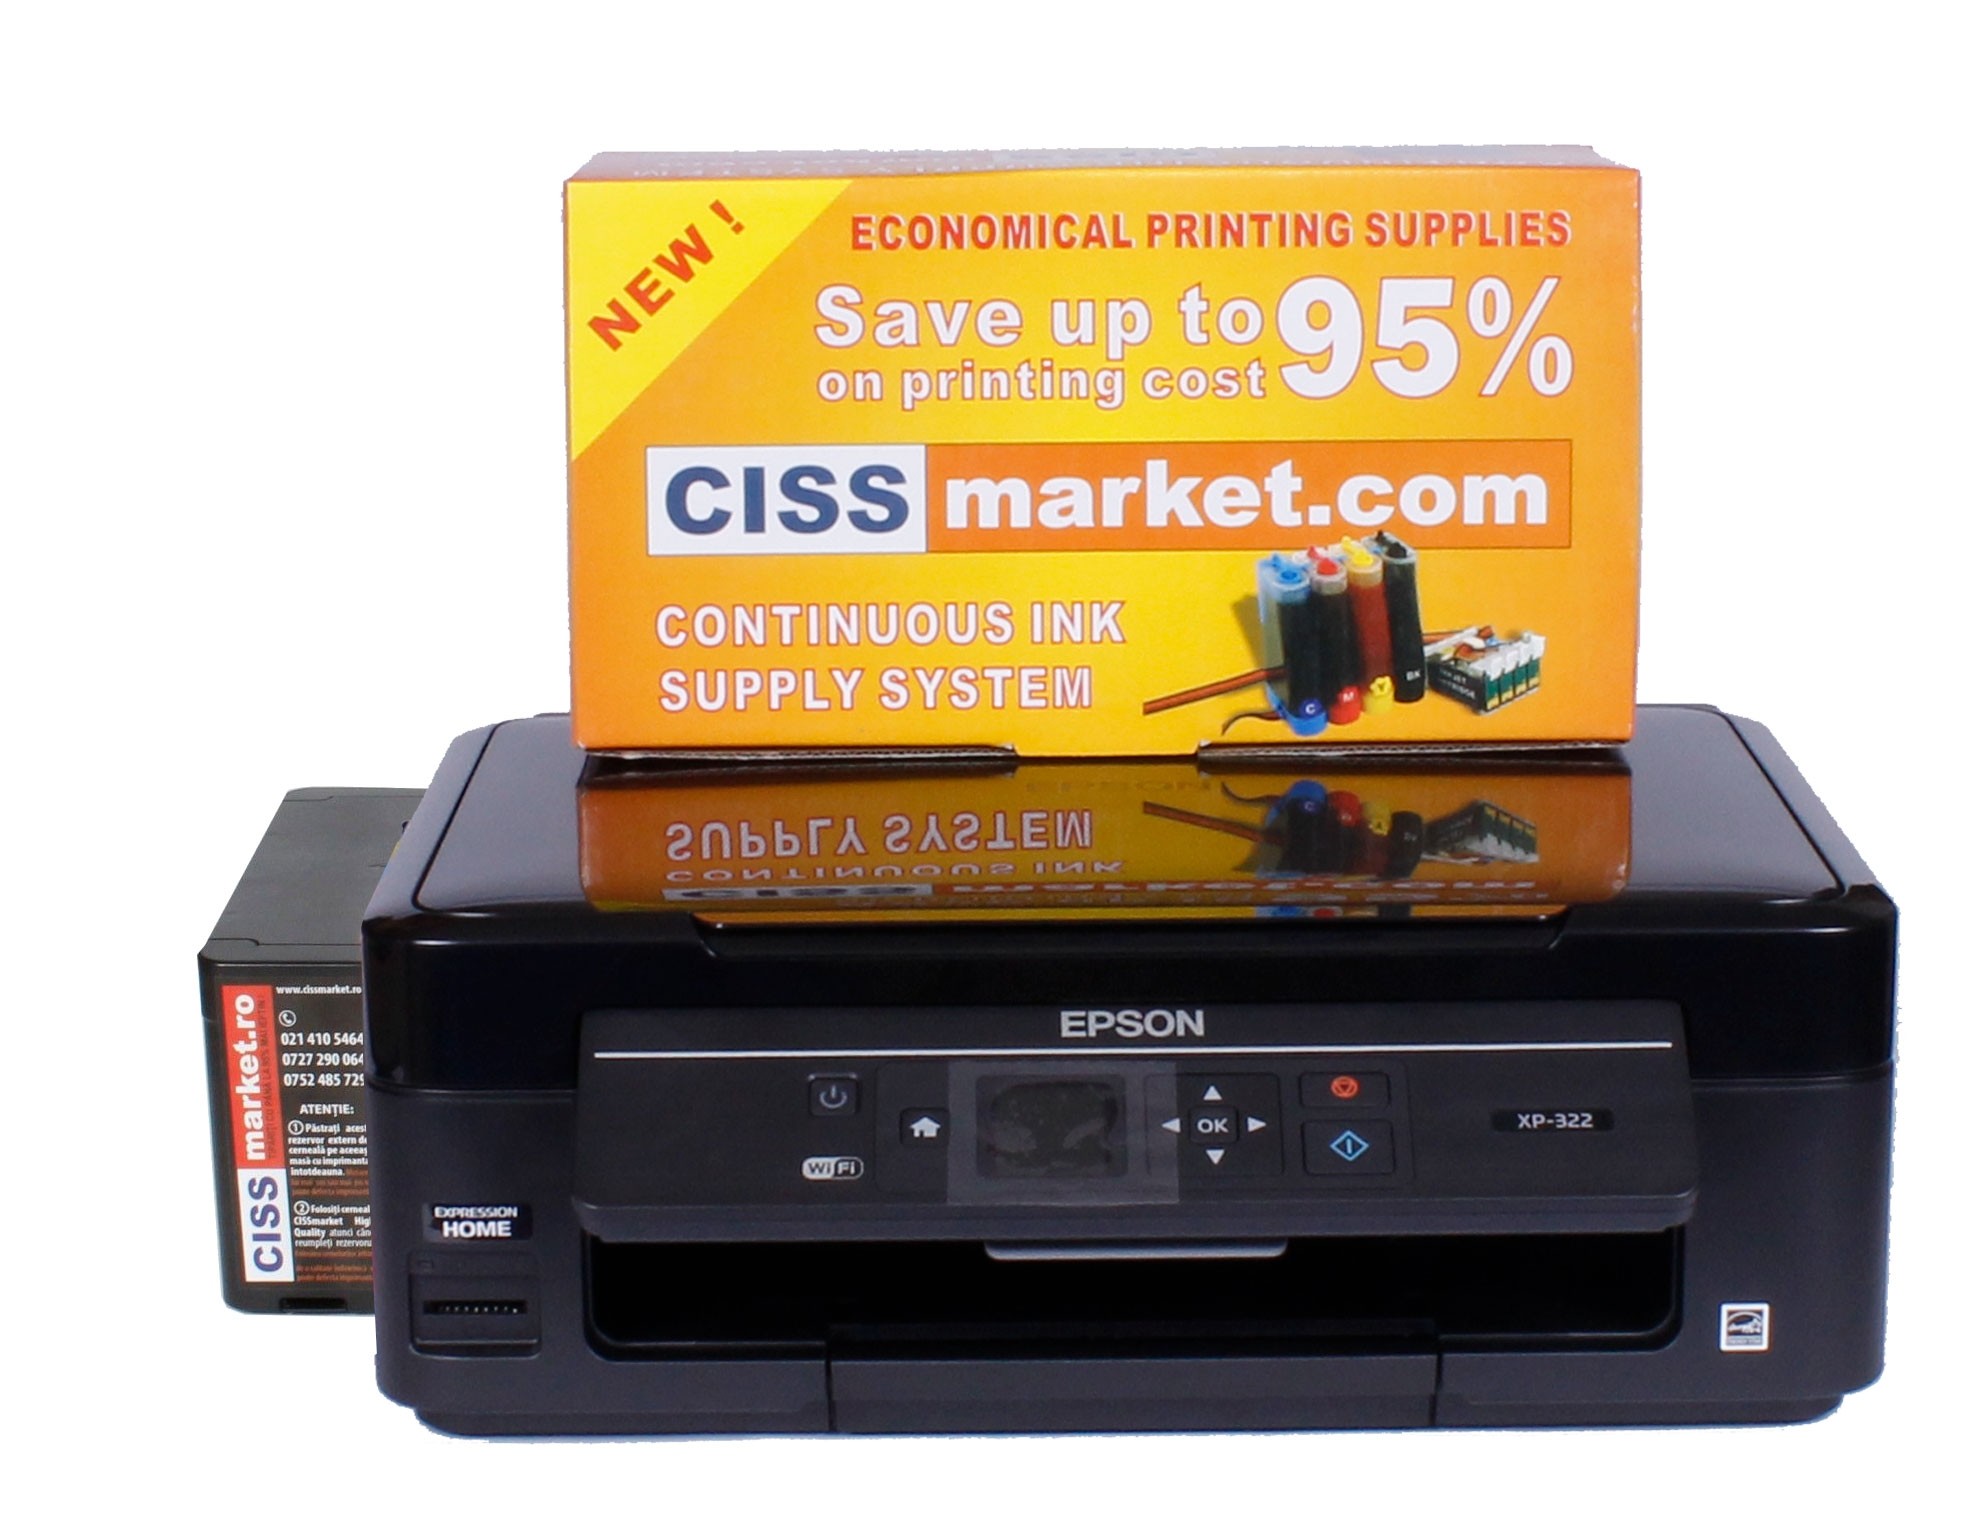 global cleaner wave Epson Expression Home XP-352 CISS, LCD, WiFi | CISSmarket.ro